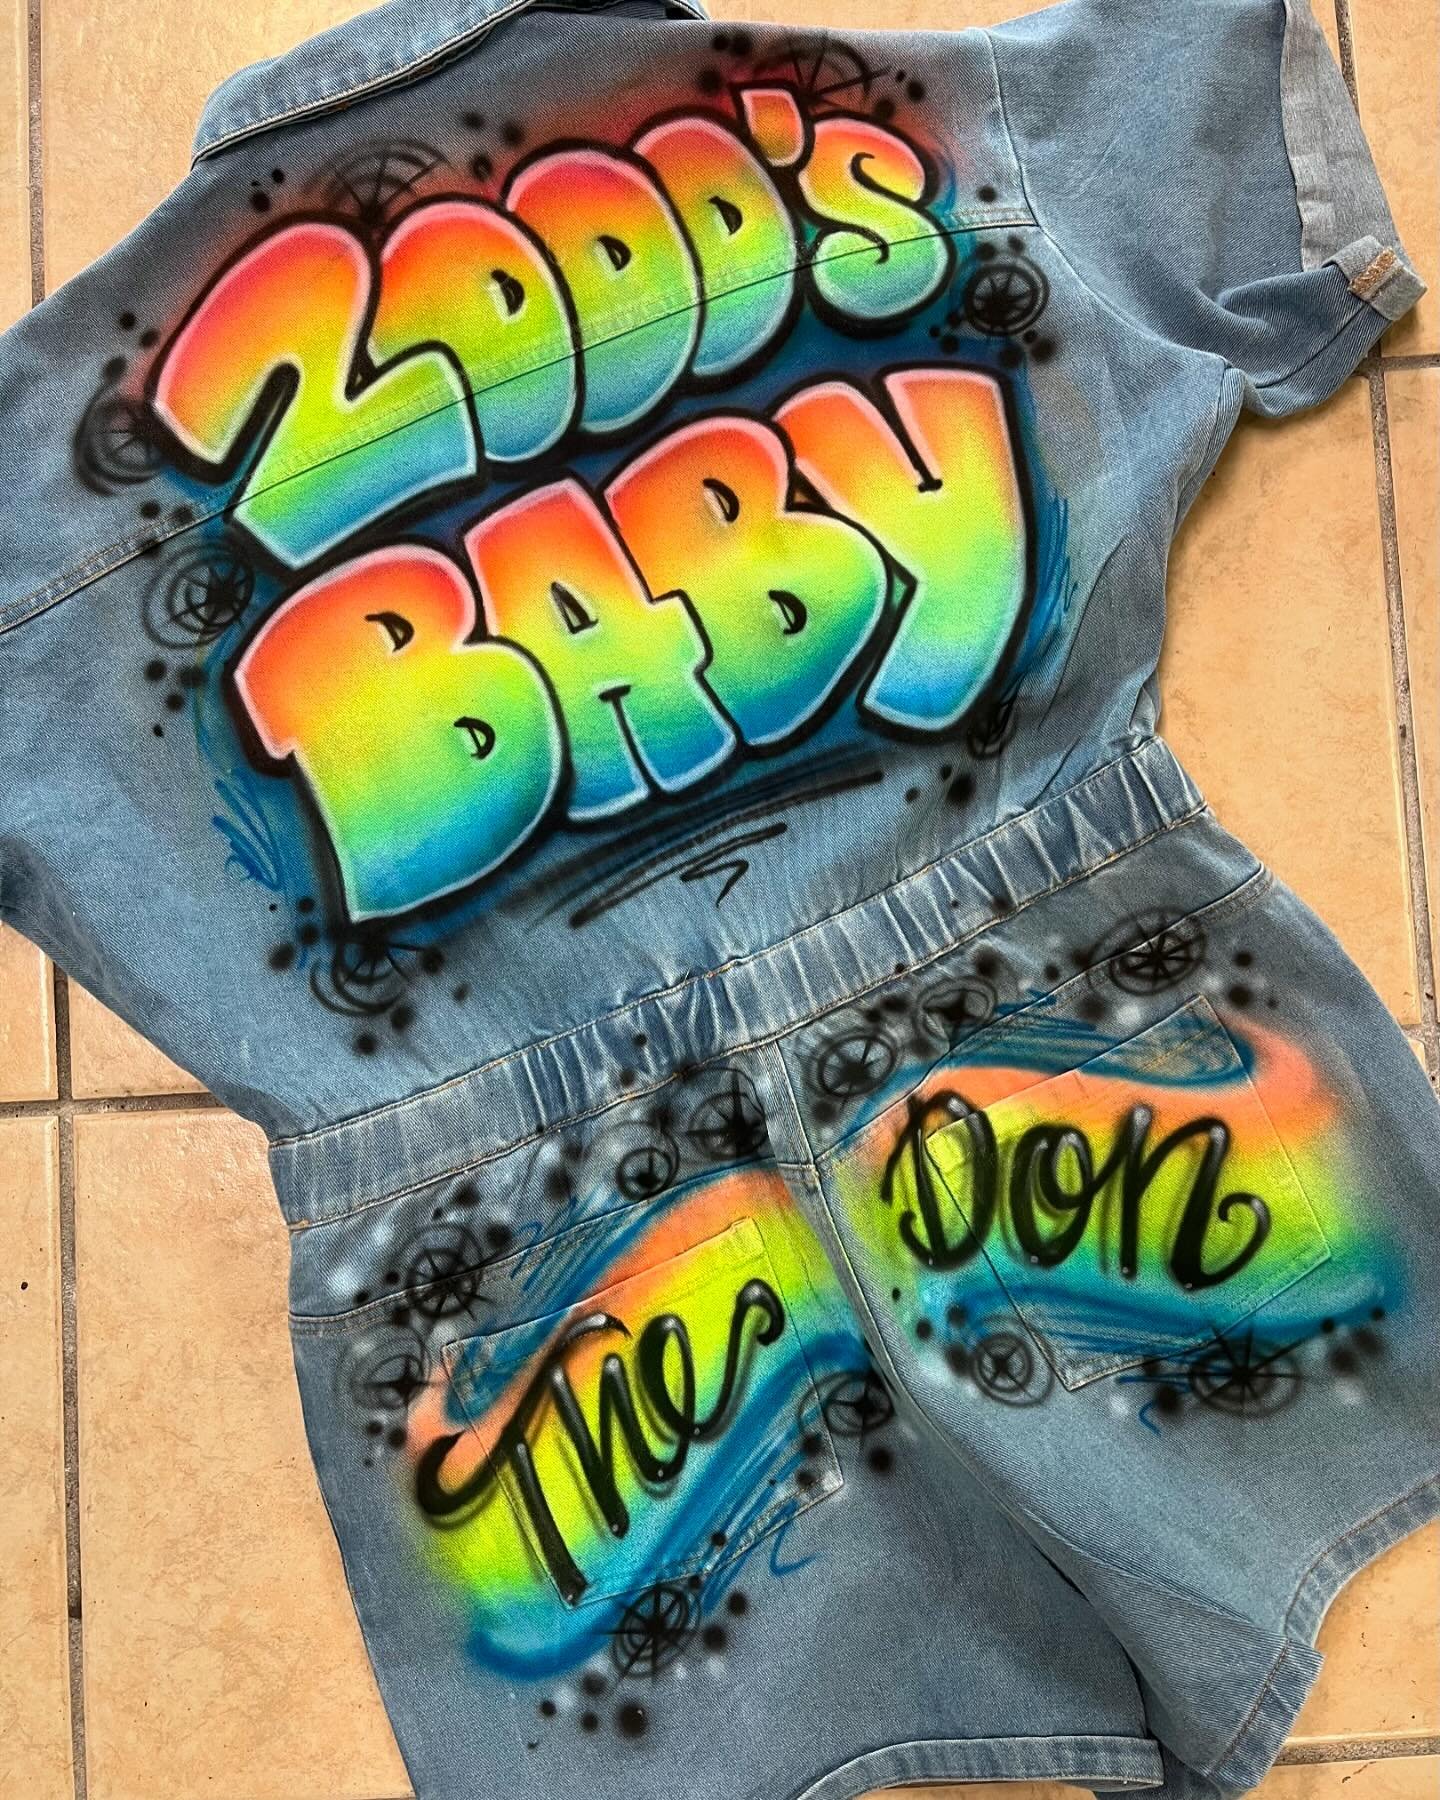 Some recent custom airbrushed outfits. Ask us what we can do for you.
.
.
.
#airbrush #airbrushartists #airbrushedtshirts #tshirts #artists  #cincinnati #customartwork #cincinnatiairbrush #airbrushincincinnati #art